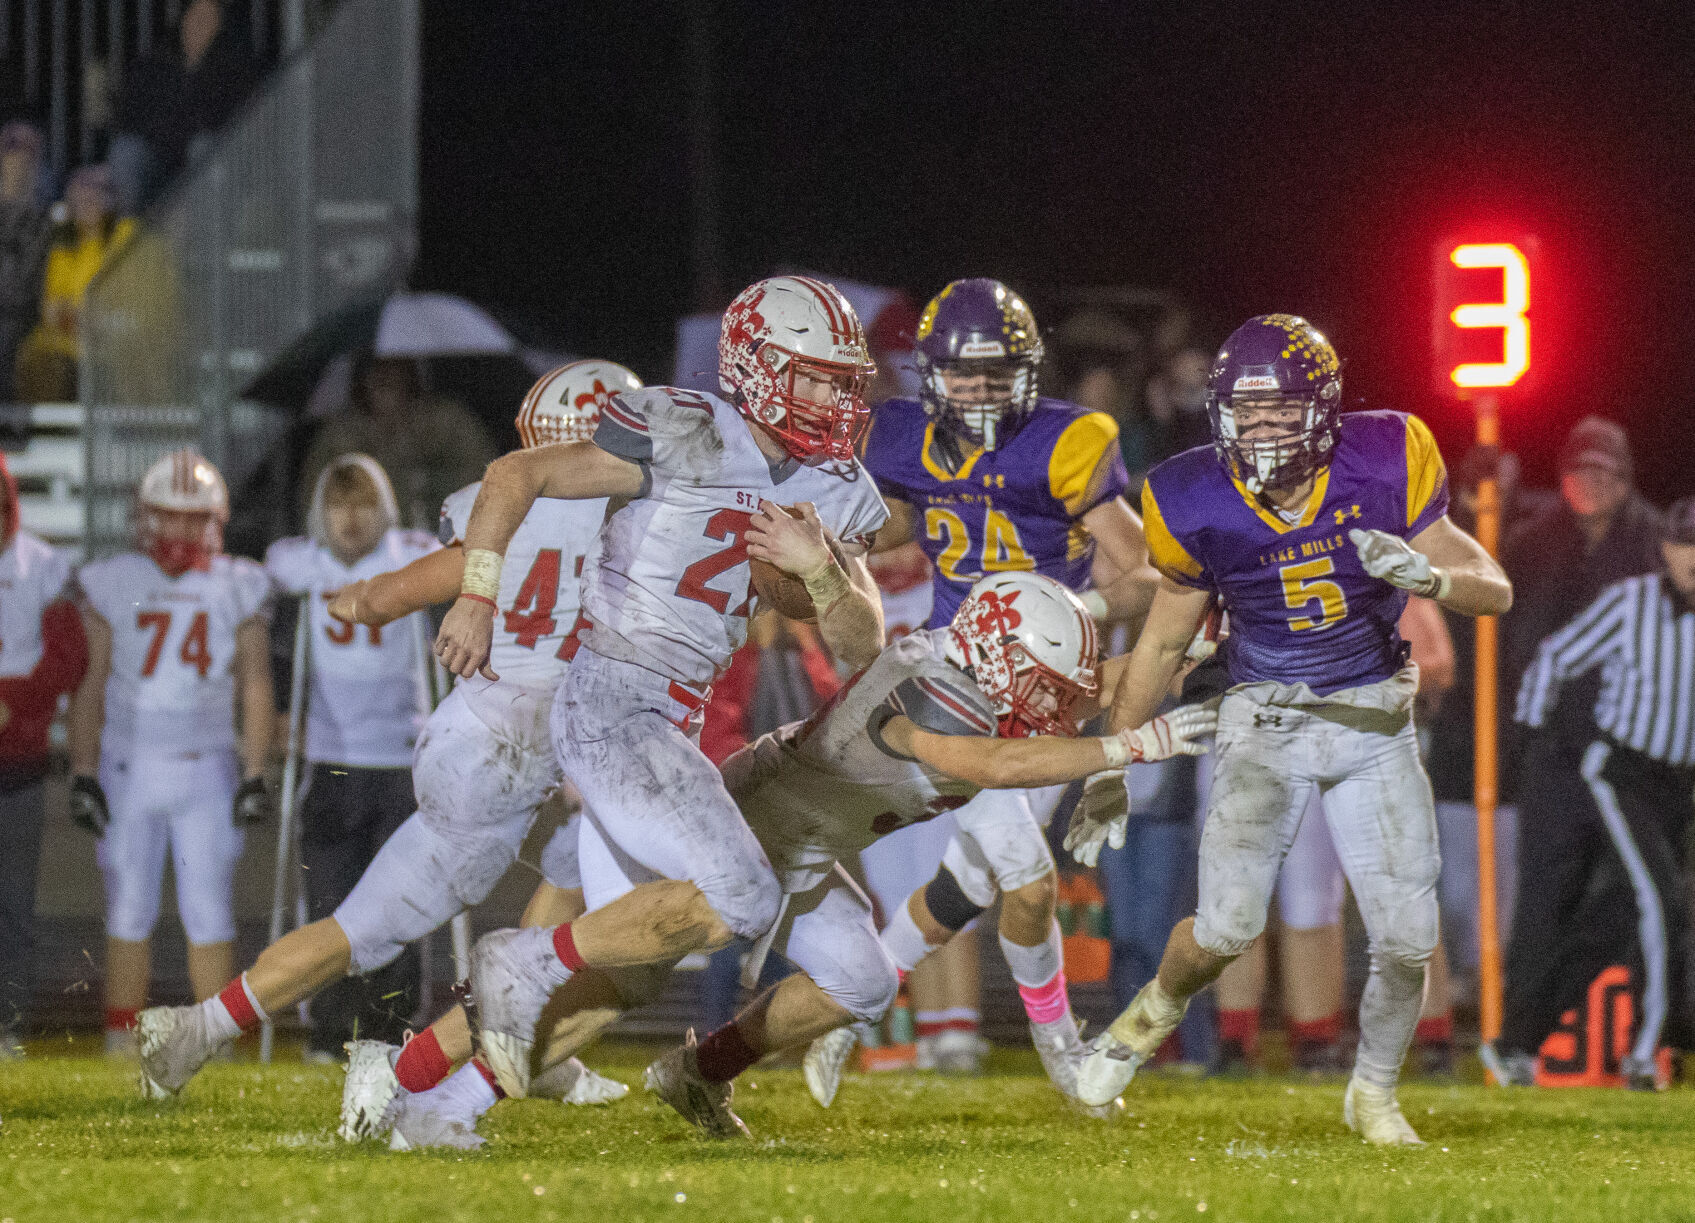 High school football in North Iowa gears up for final week of regular season and playoffs